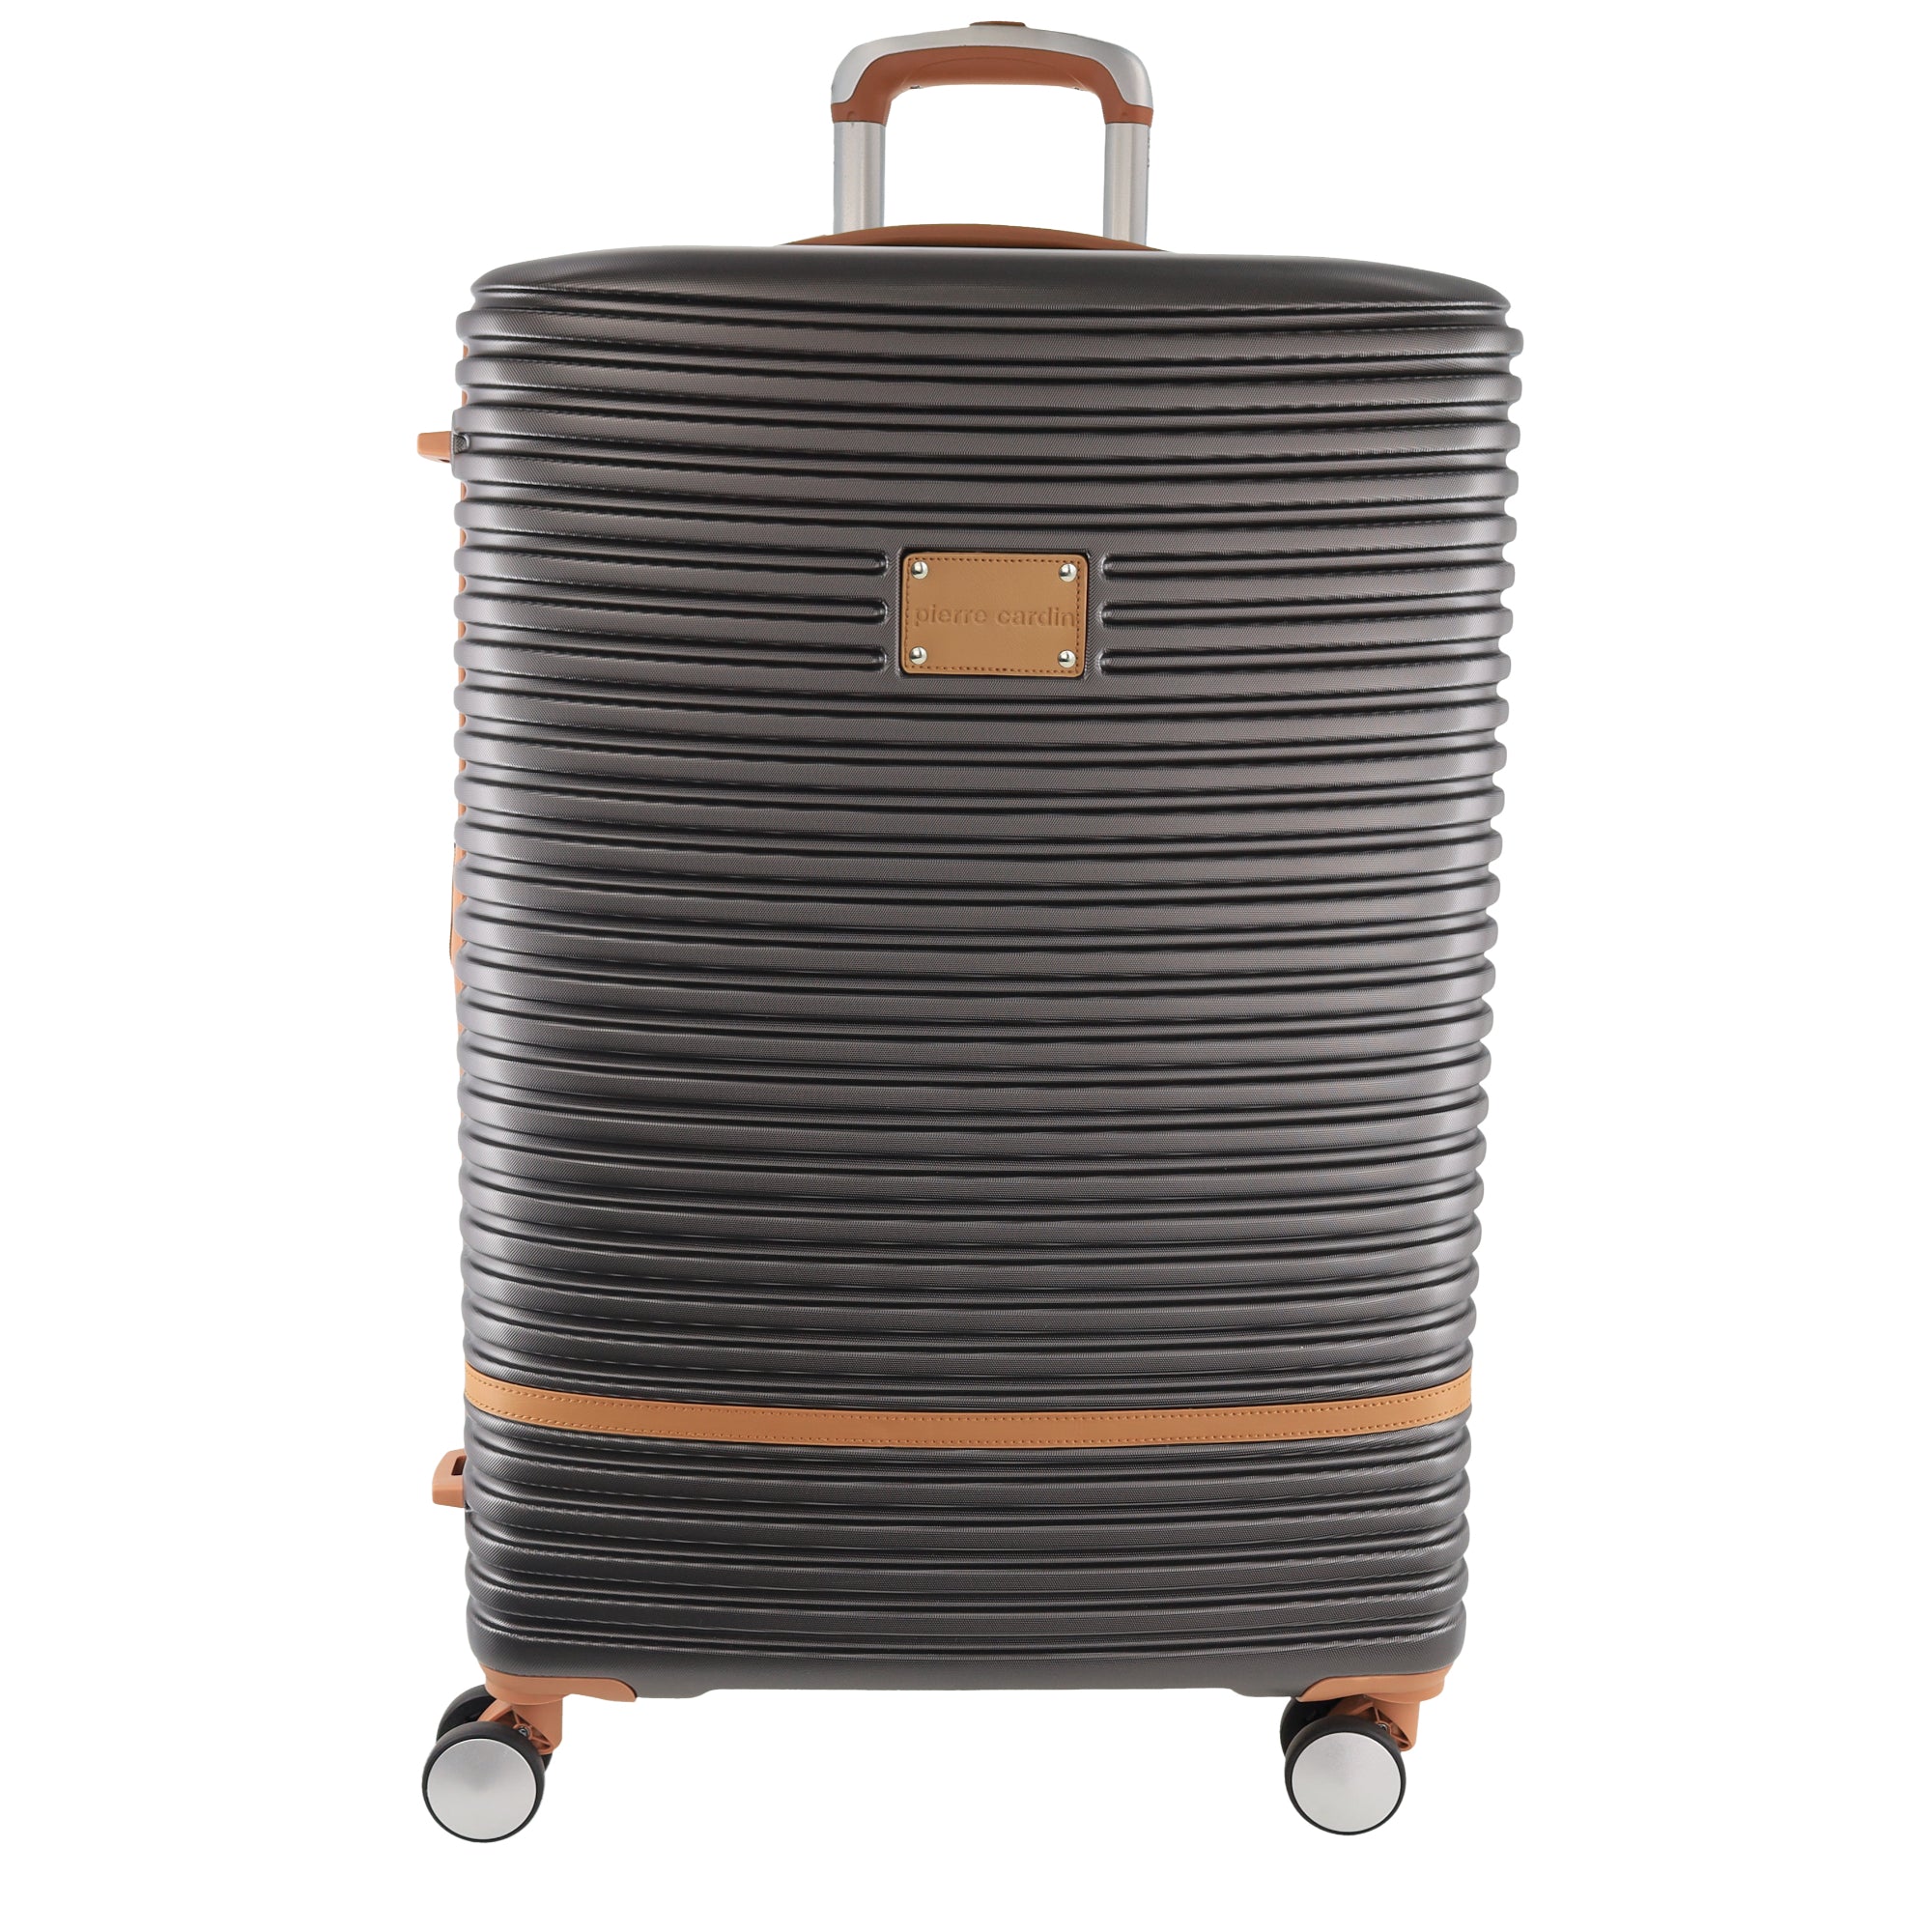 Pierre Cardin 80cm LARGE Hard Shell Suitcase in Charcoal